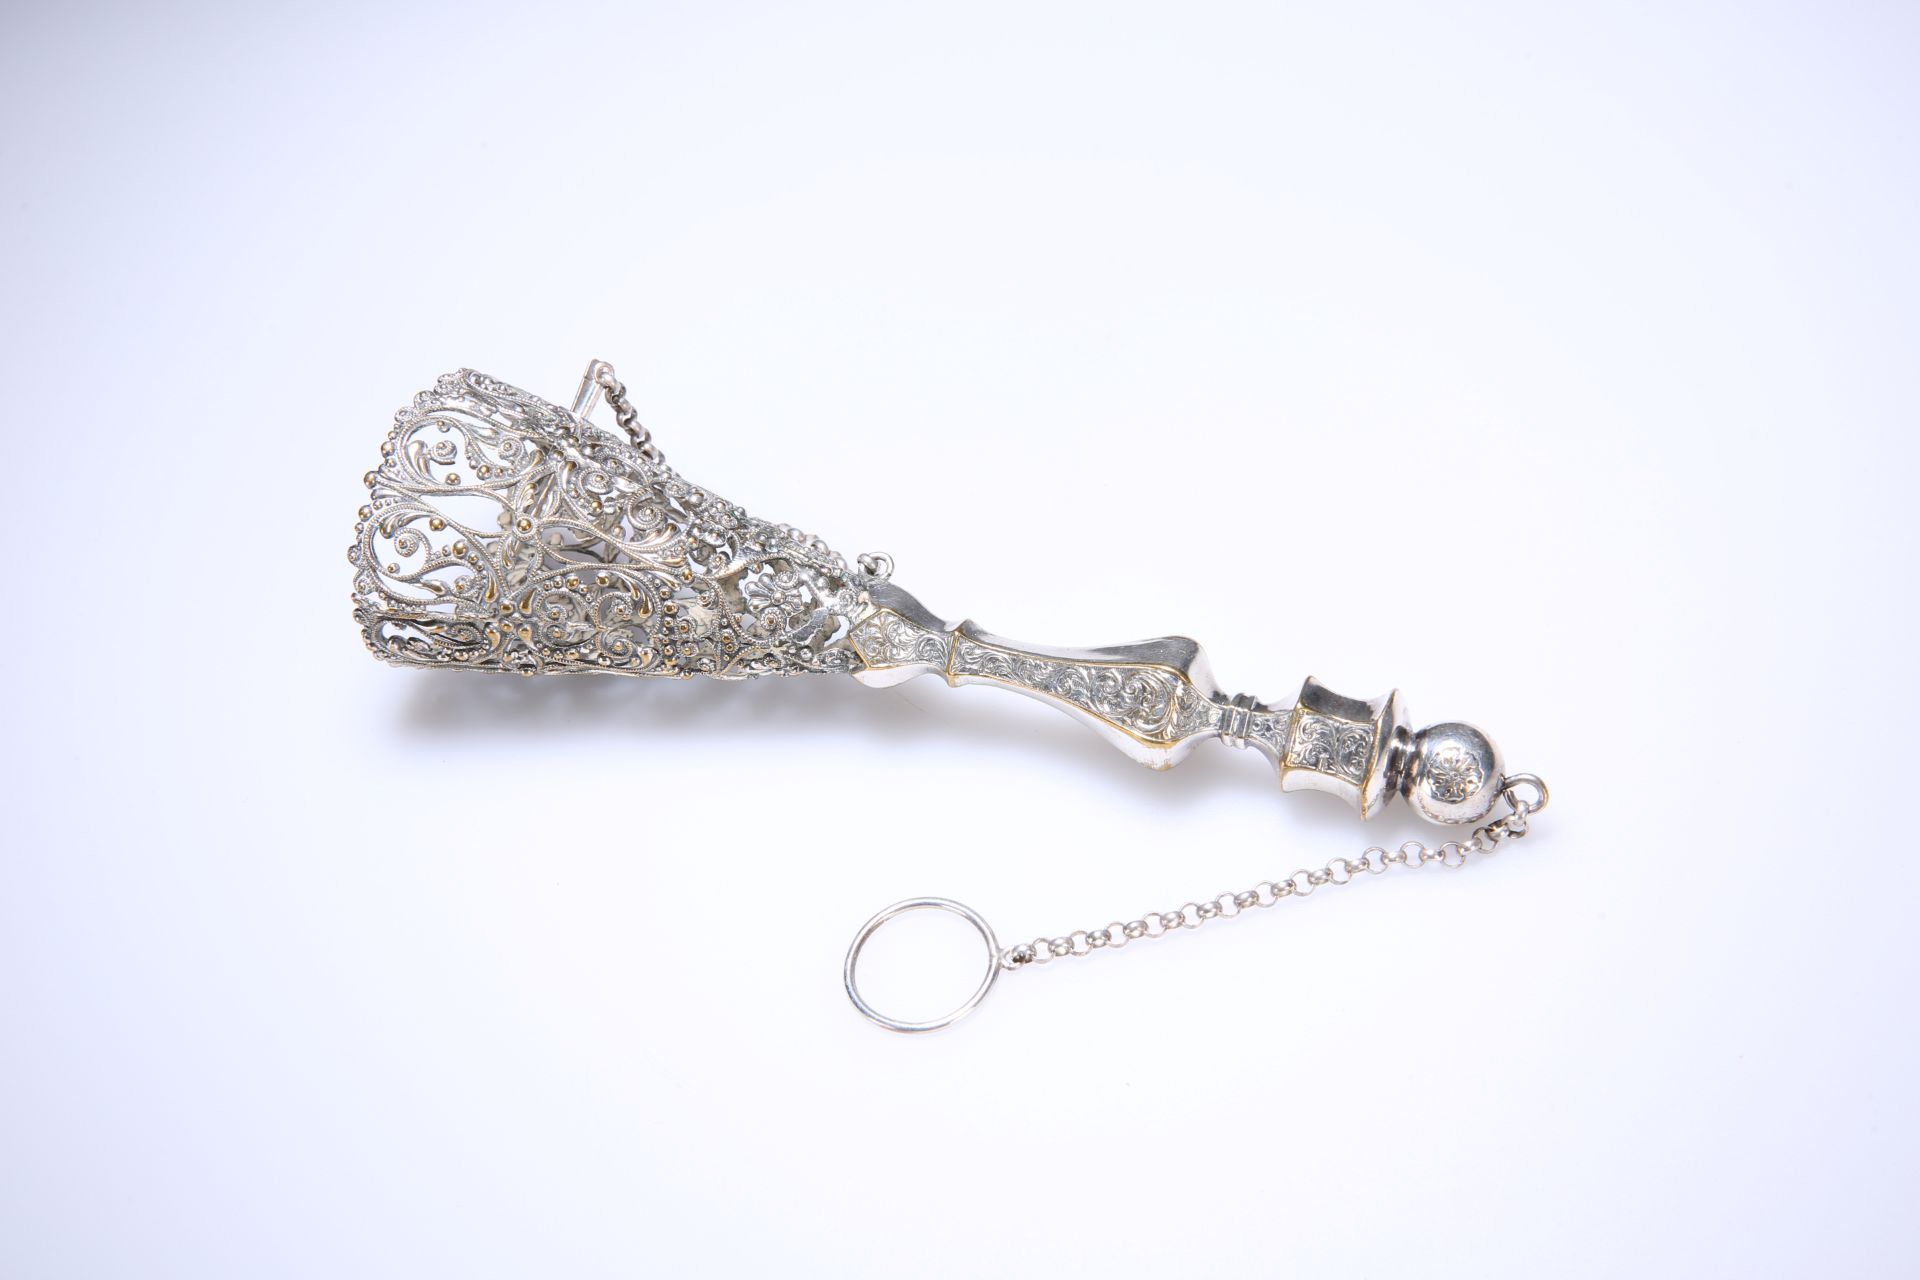 A FINE 19TH CENTURY SILVER-PLATED POSY HOLDER